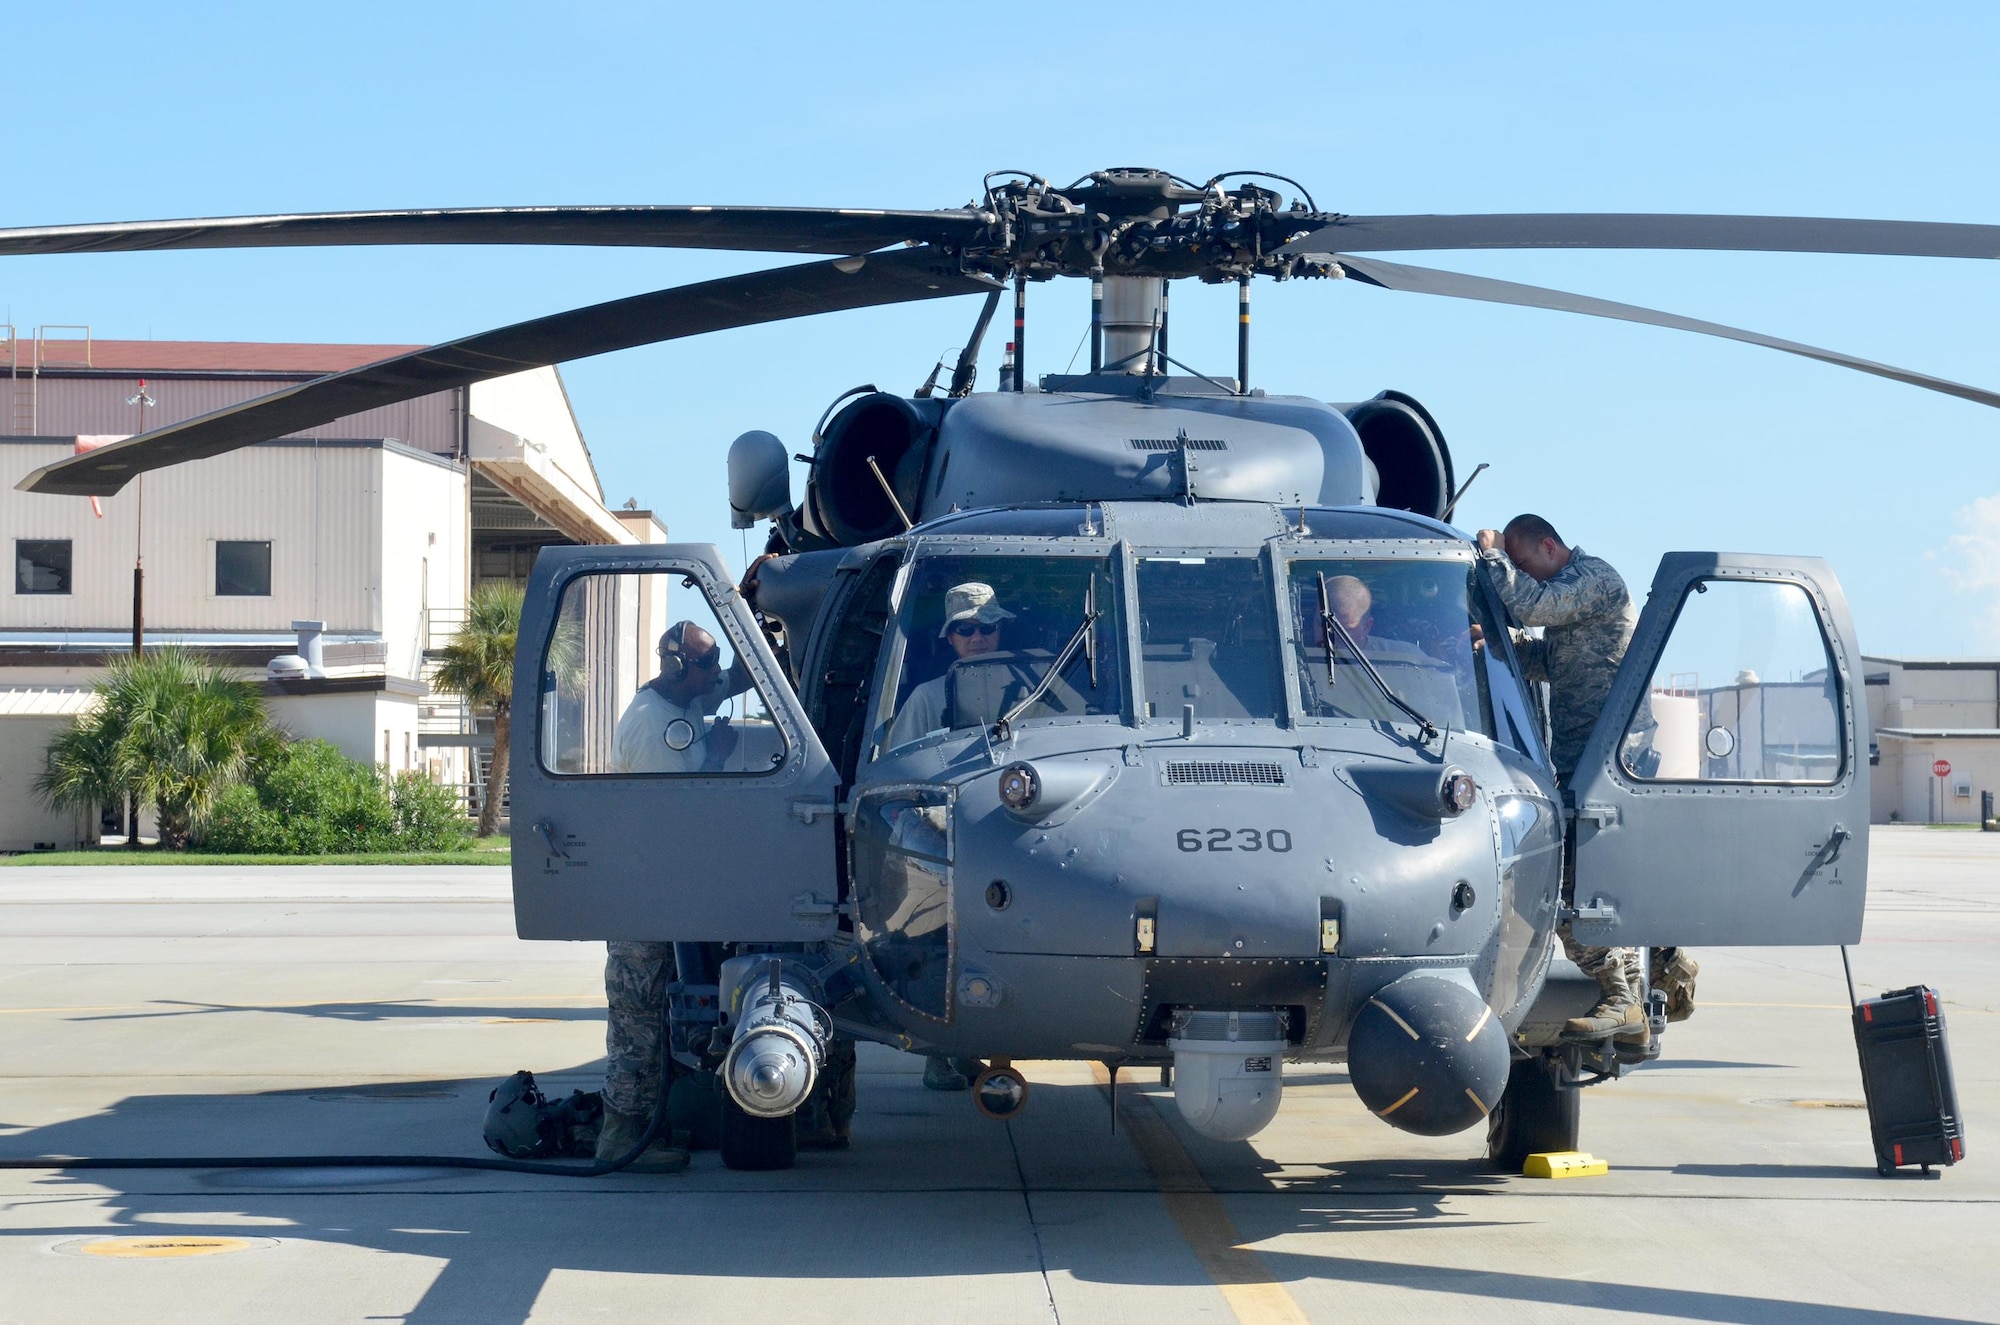 Maintenance teams from the 920th Rescue Wing, Patrick Air Force Base, Florida, ready its wings to be relocated September 7 in response to Hurricane Irma’s projected path and to pre-position for rescue efforts after the storm if needed. Aircrews flew three HH-60G “Jolly” Pave Hawk helicopters to Orlando; and two HC-130P/N “King” fixed-wing aerial refueling aircraft to Georgia; while pararescue teams configured as a rescue assets in case they are called into action from the aftermath of the storm. (U.S. Air Force photo/Maj. Cathleen Snow)